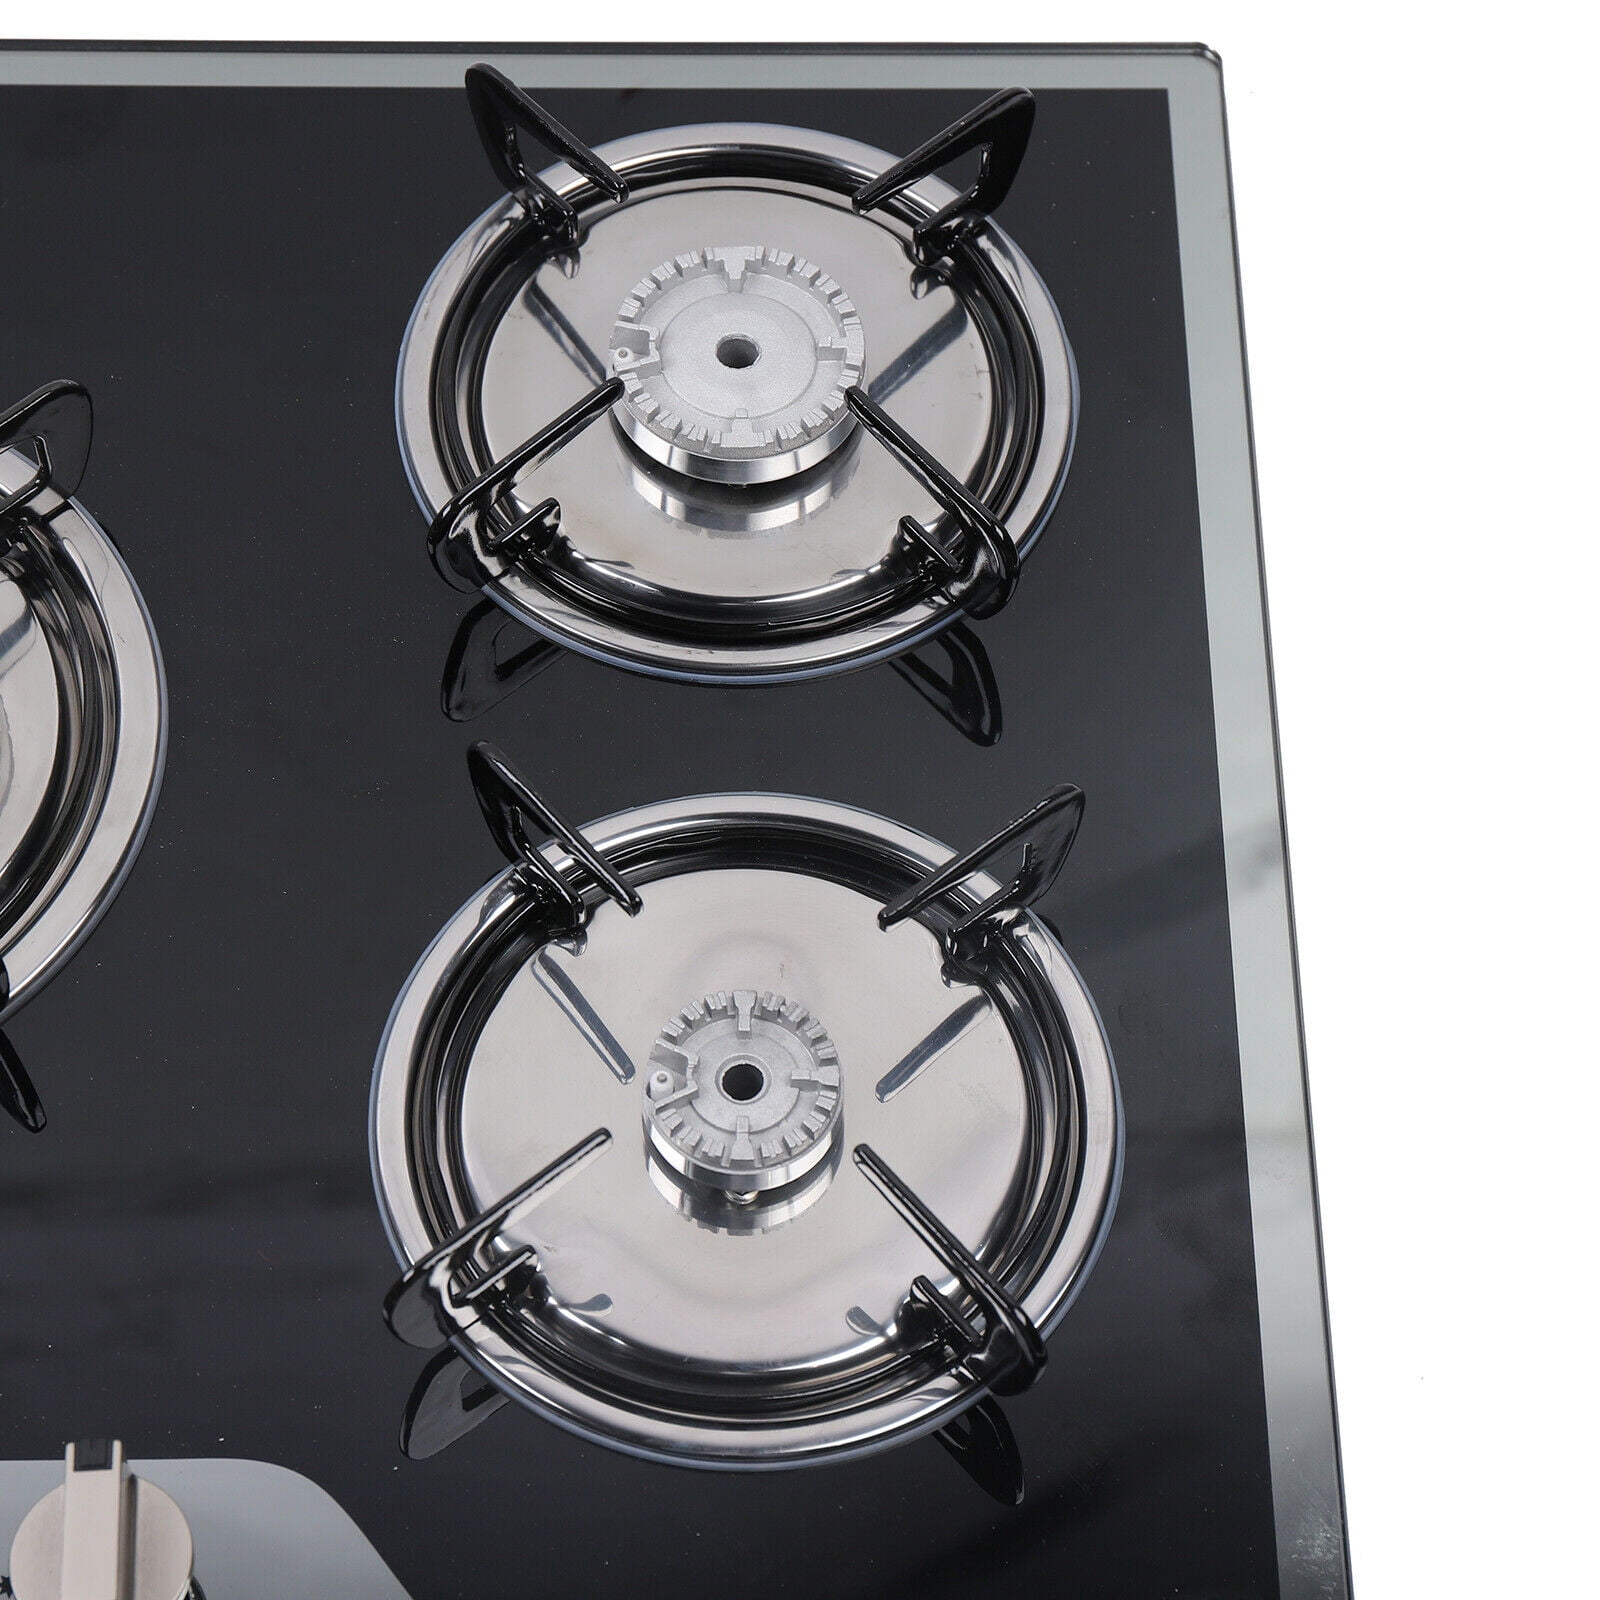 Oukaning 2 Burners Kitchen Gas Cooktop Stove Built-In LPG/NG Gas Stove  Tempered Glass Top 